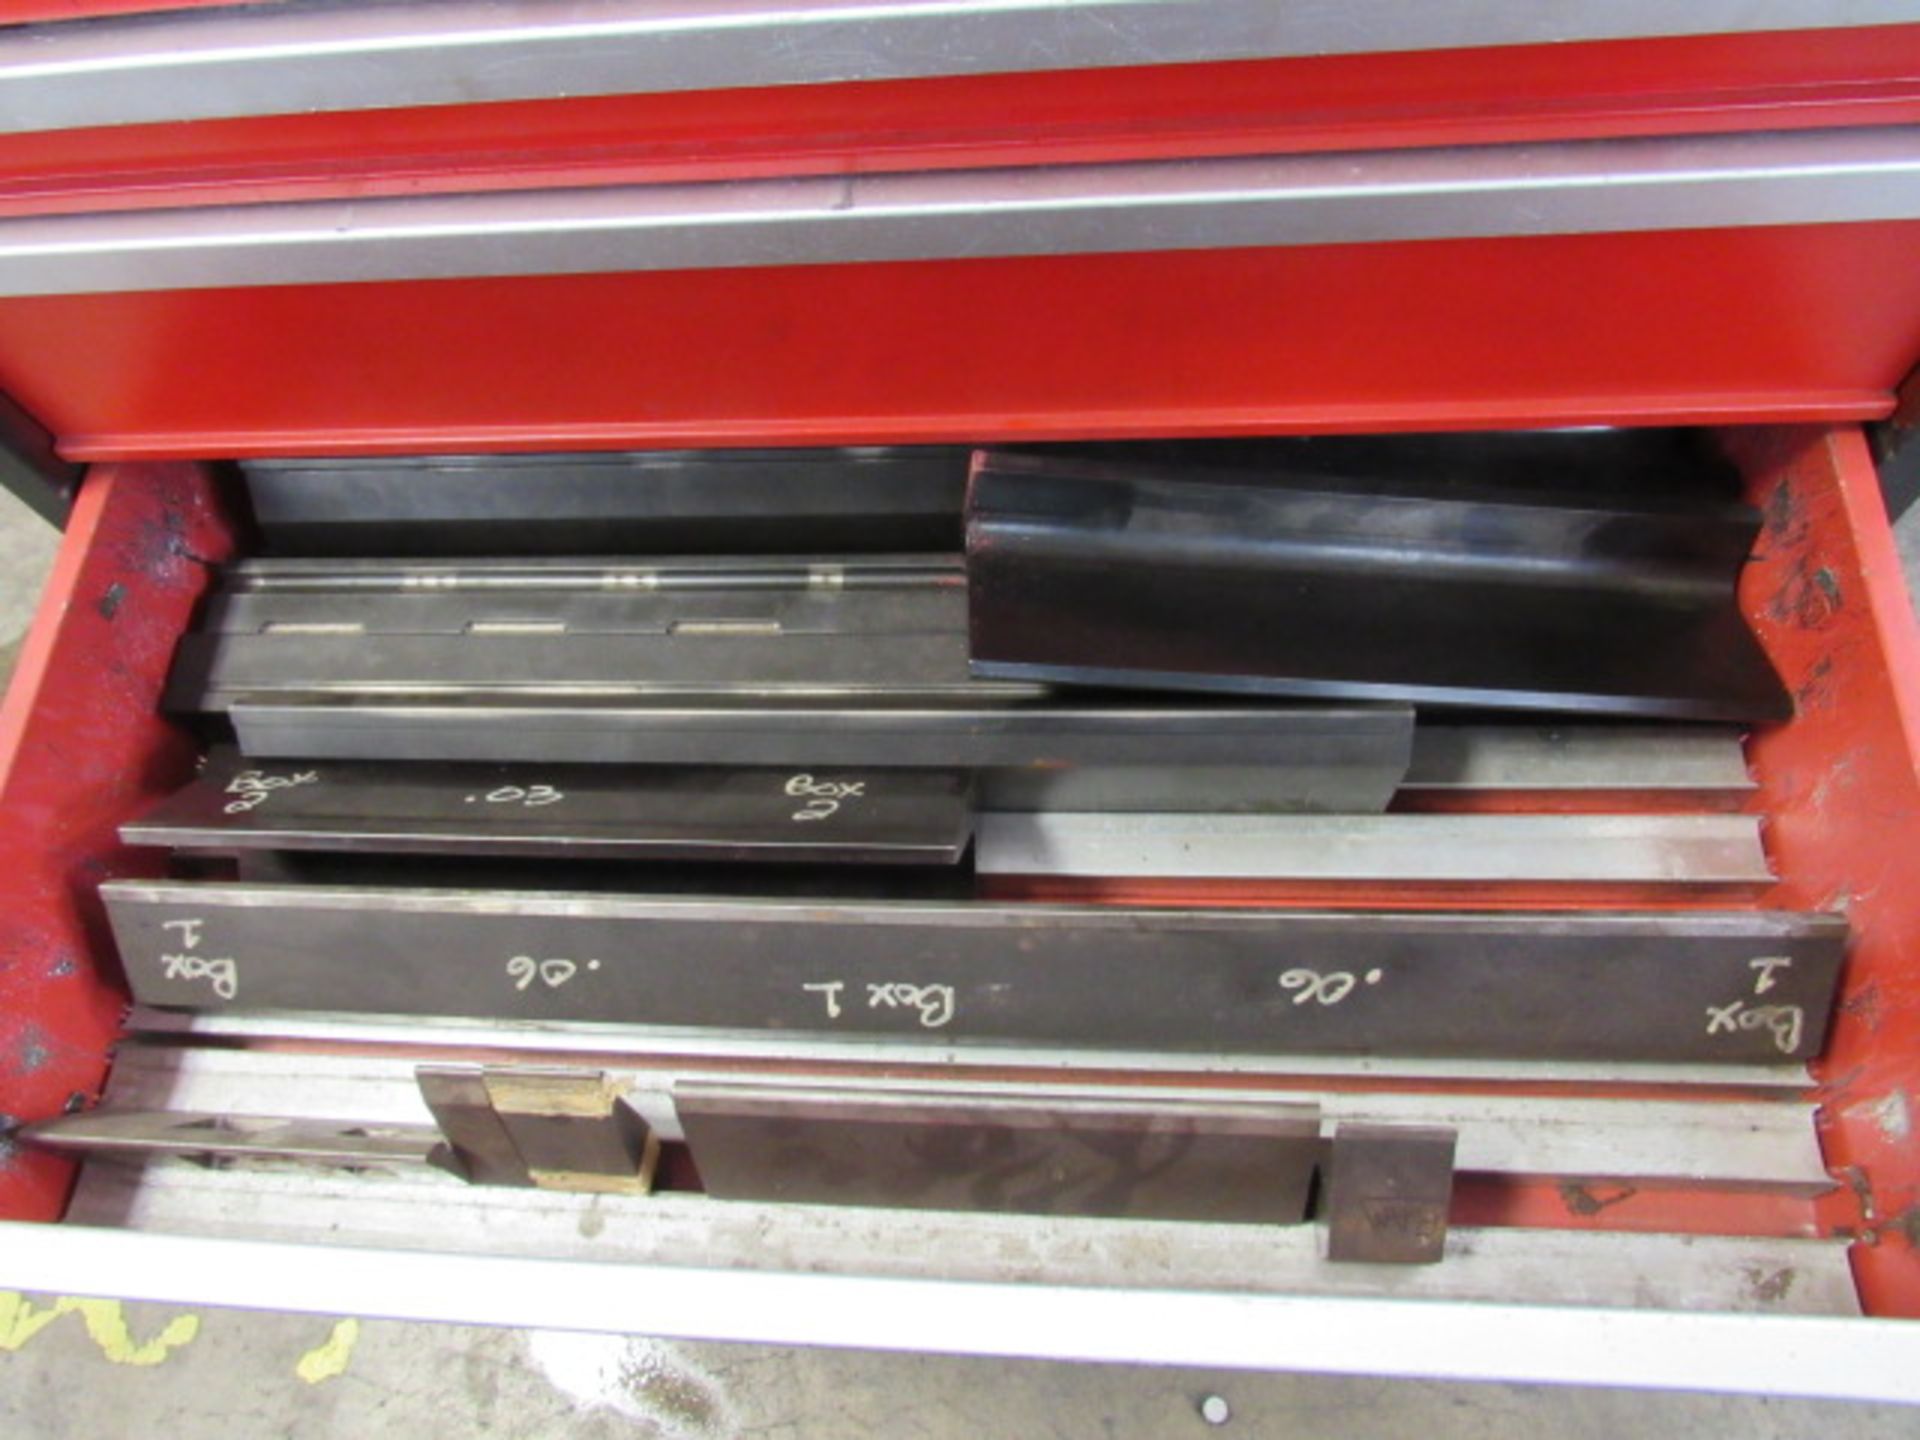 Amada 5 Drawer Portable Cabinet with Press Brake Dies - Image 4 of 7